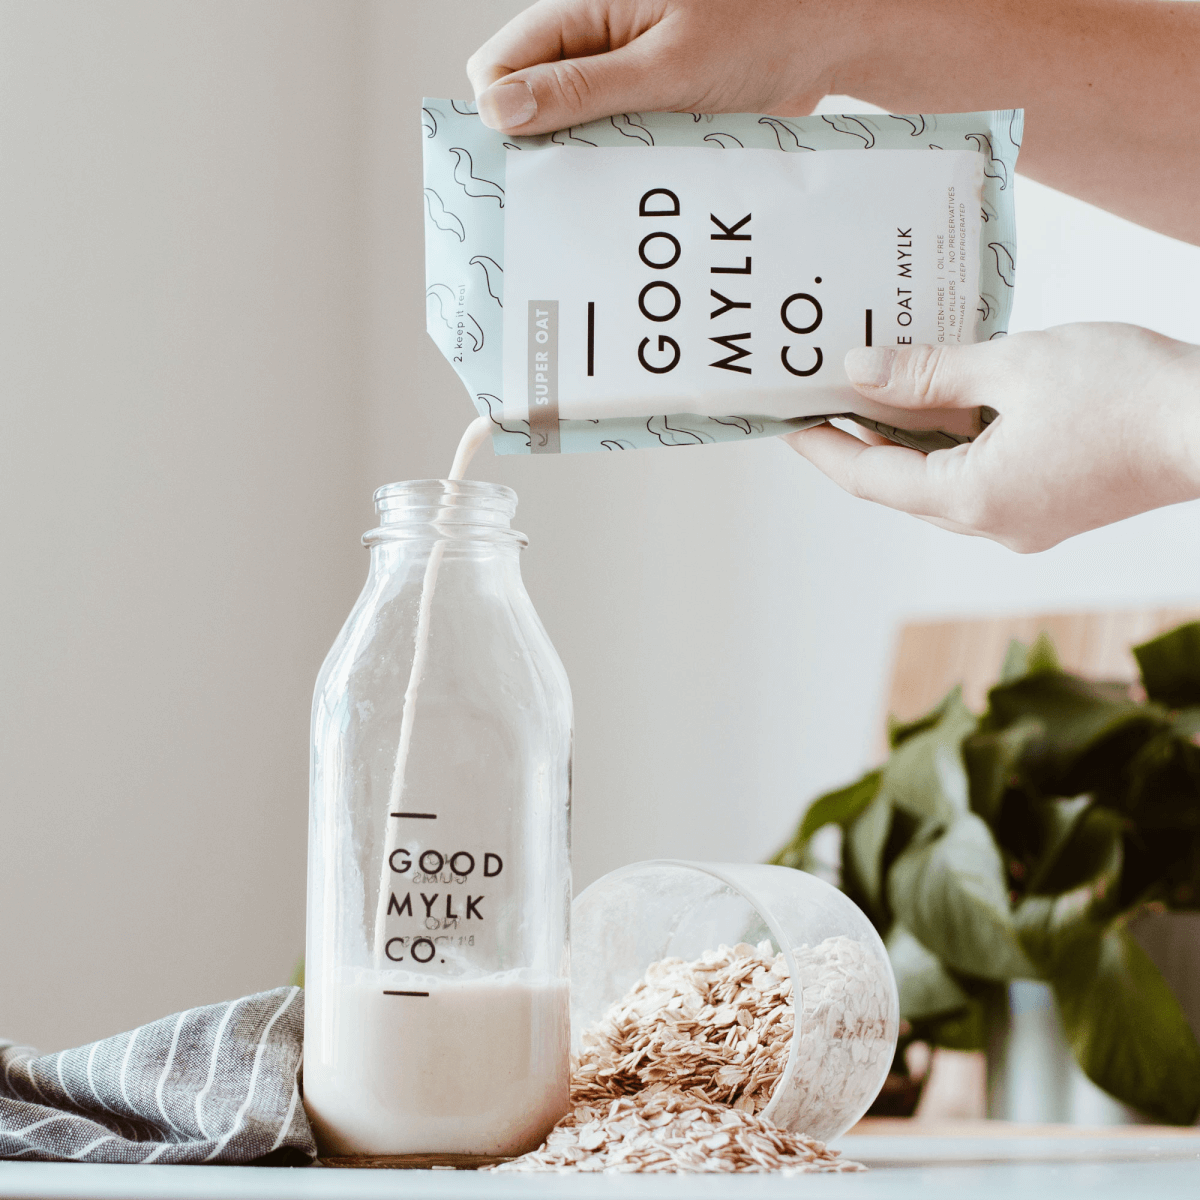 Goodmylk being poured into a bottle